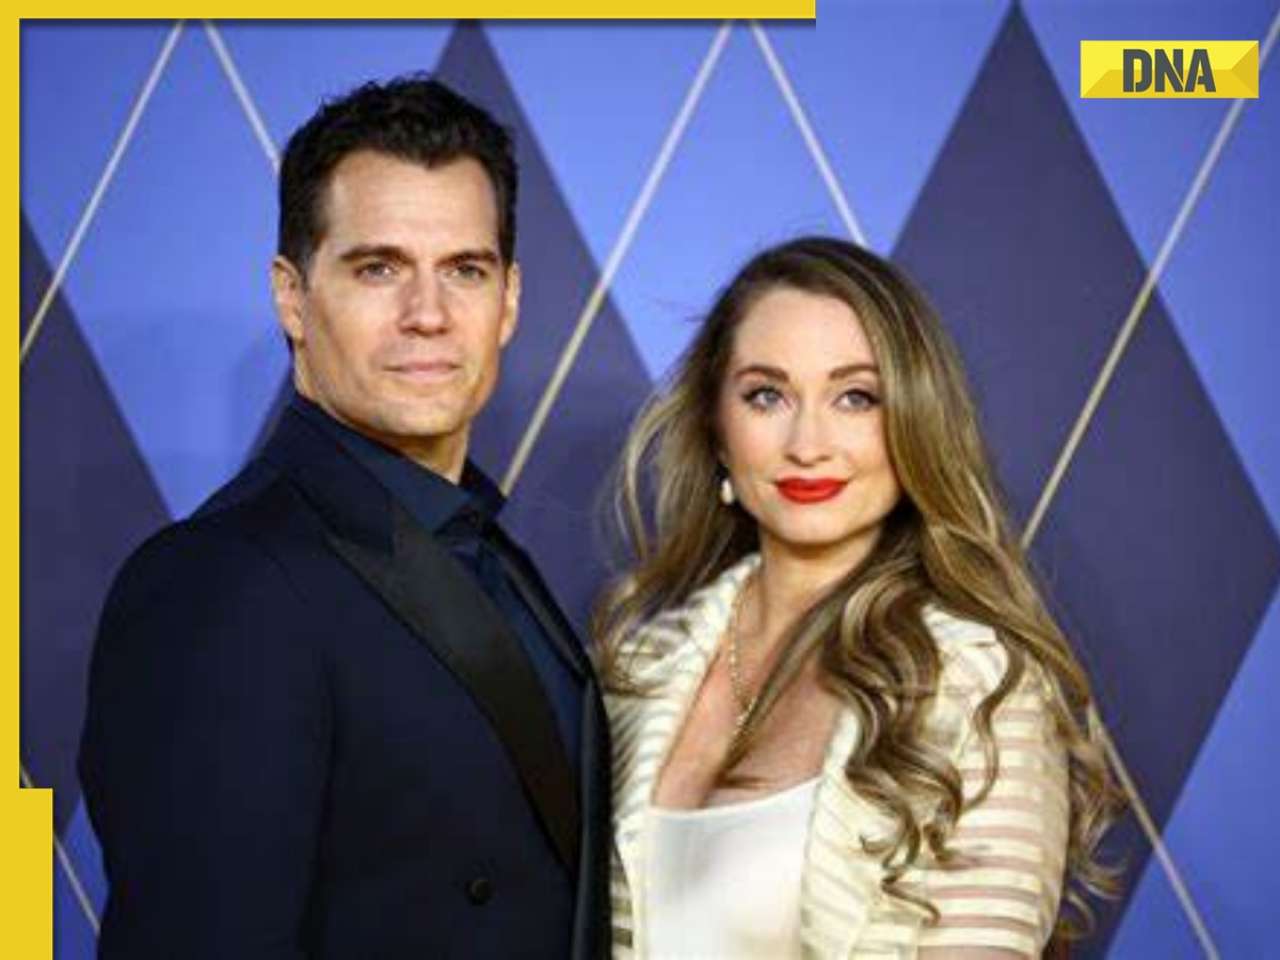 Henry Cavill and girlfriend Natalie Viscuso expecting their first child together, actor says 'I'm very excited'